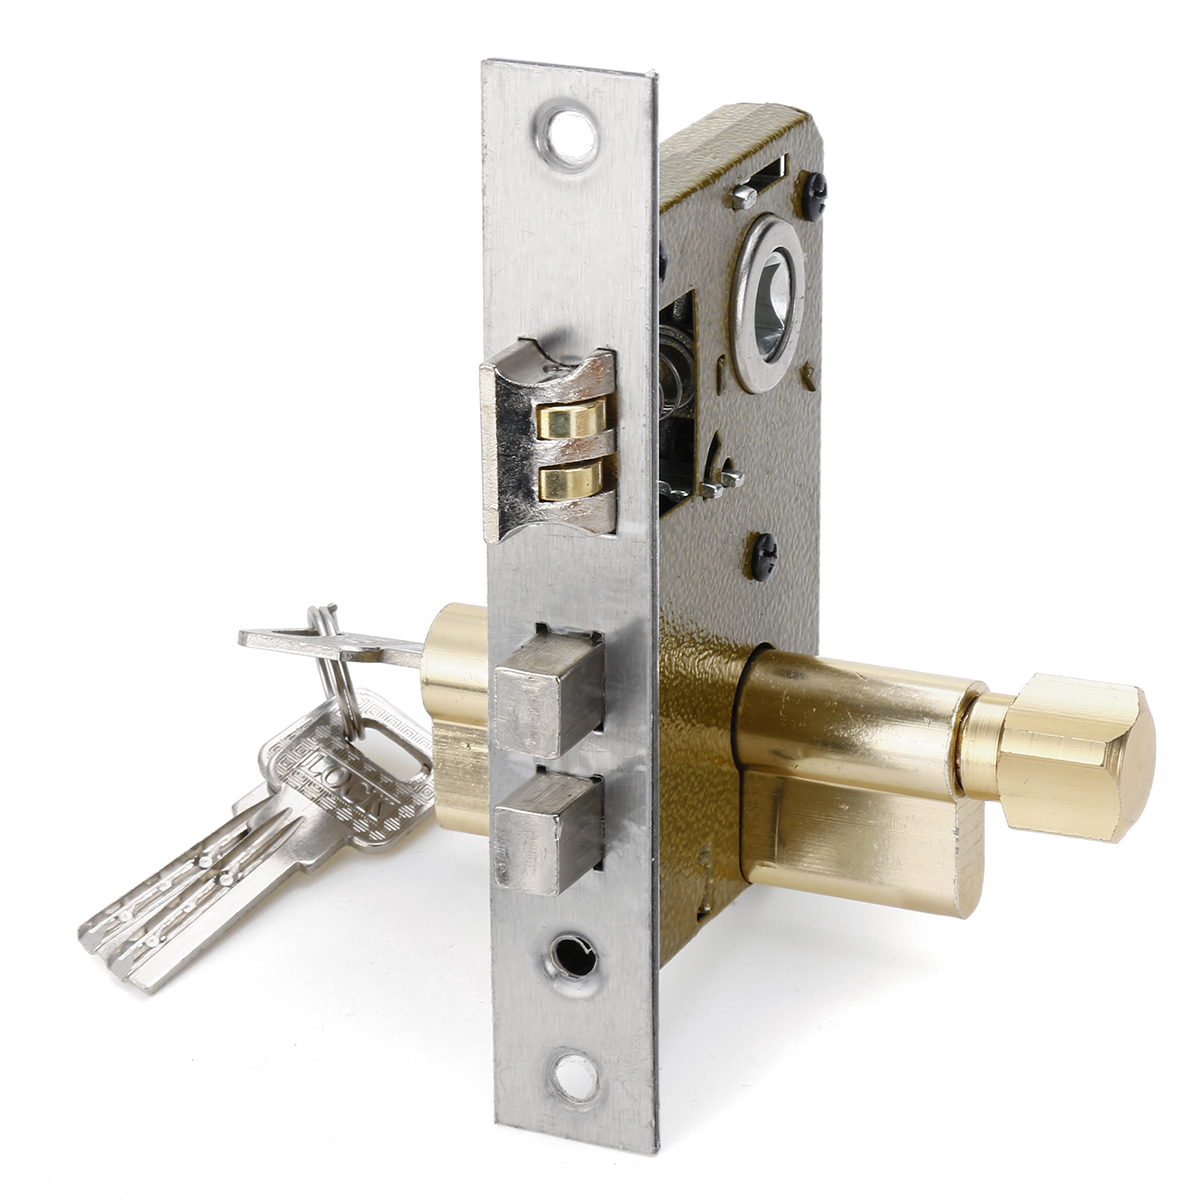 2-Set-Aluminum-Alloy-Dual-Latch-Door-Handle-Front-Back-Lever-Security-Lock-Cylinder-with-Key-1409221